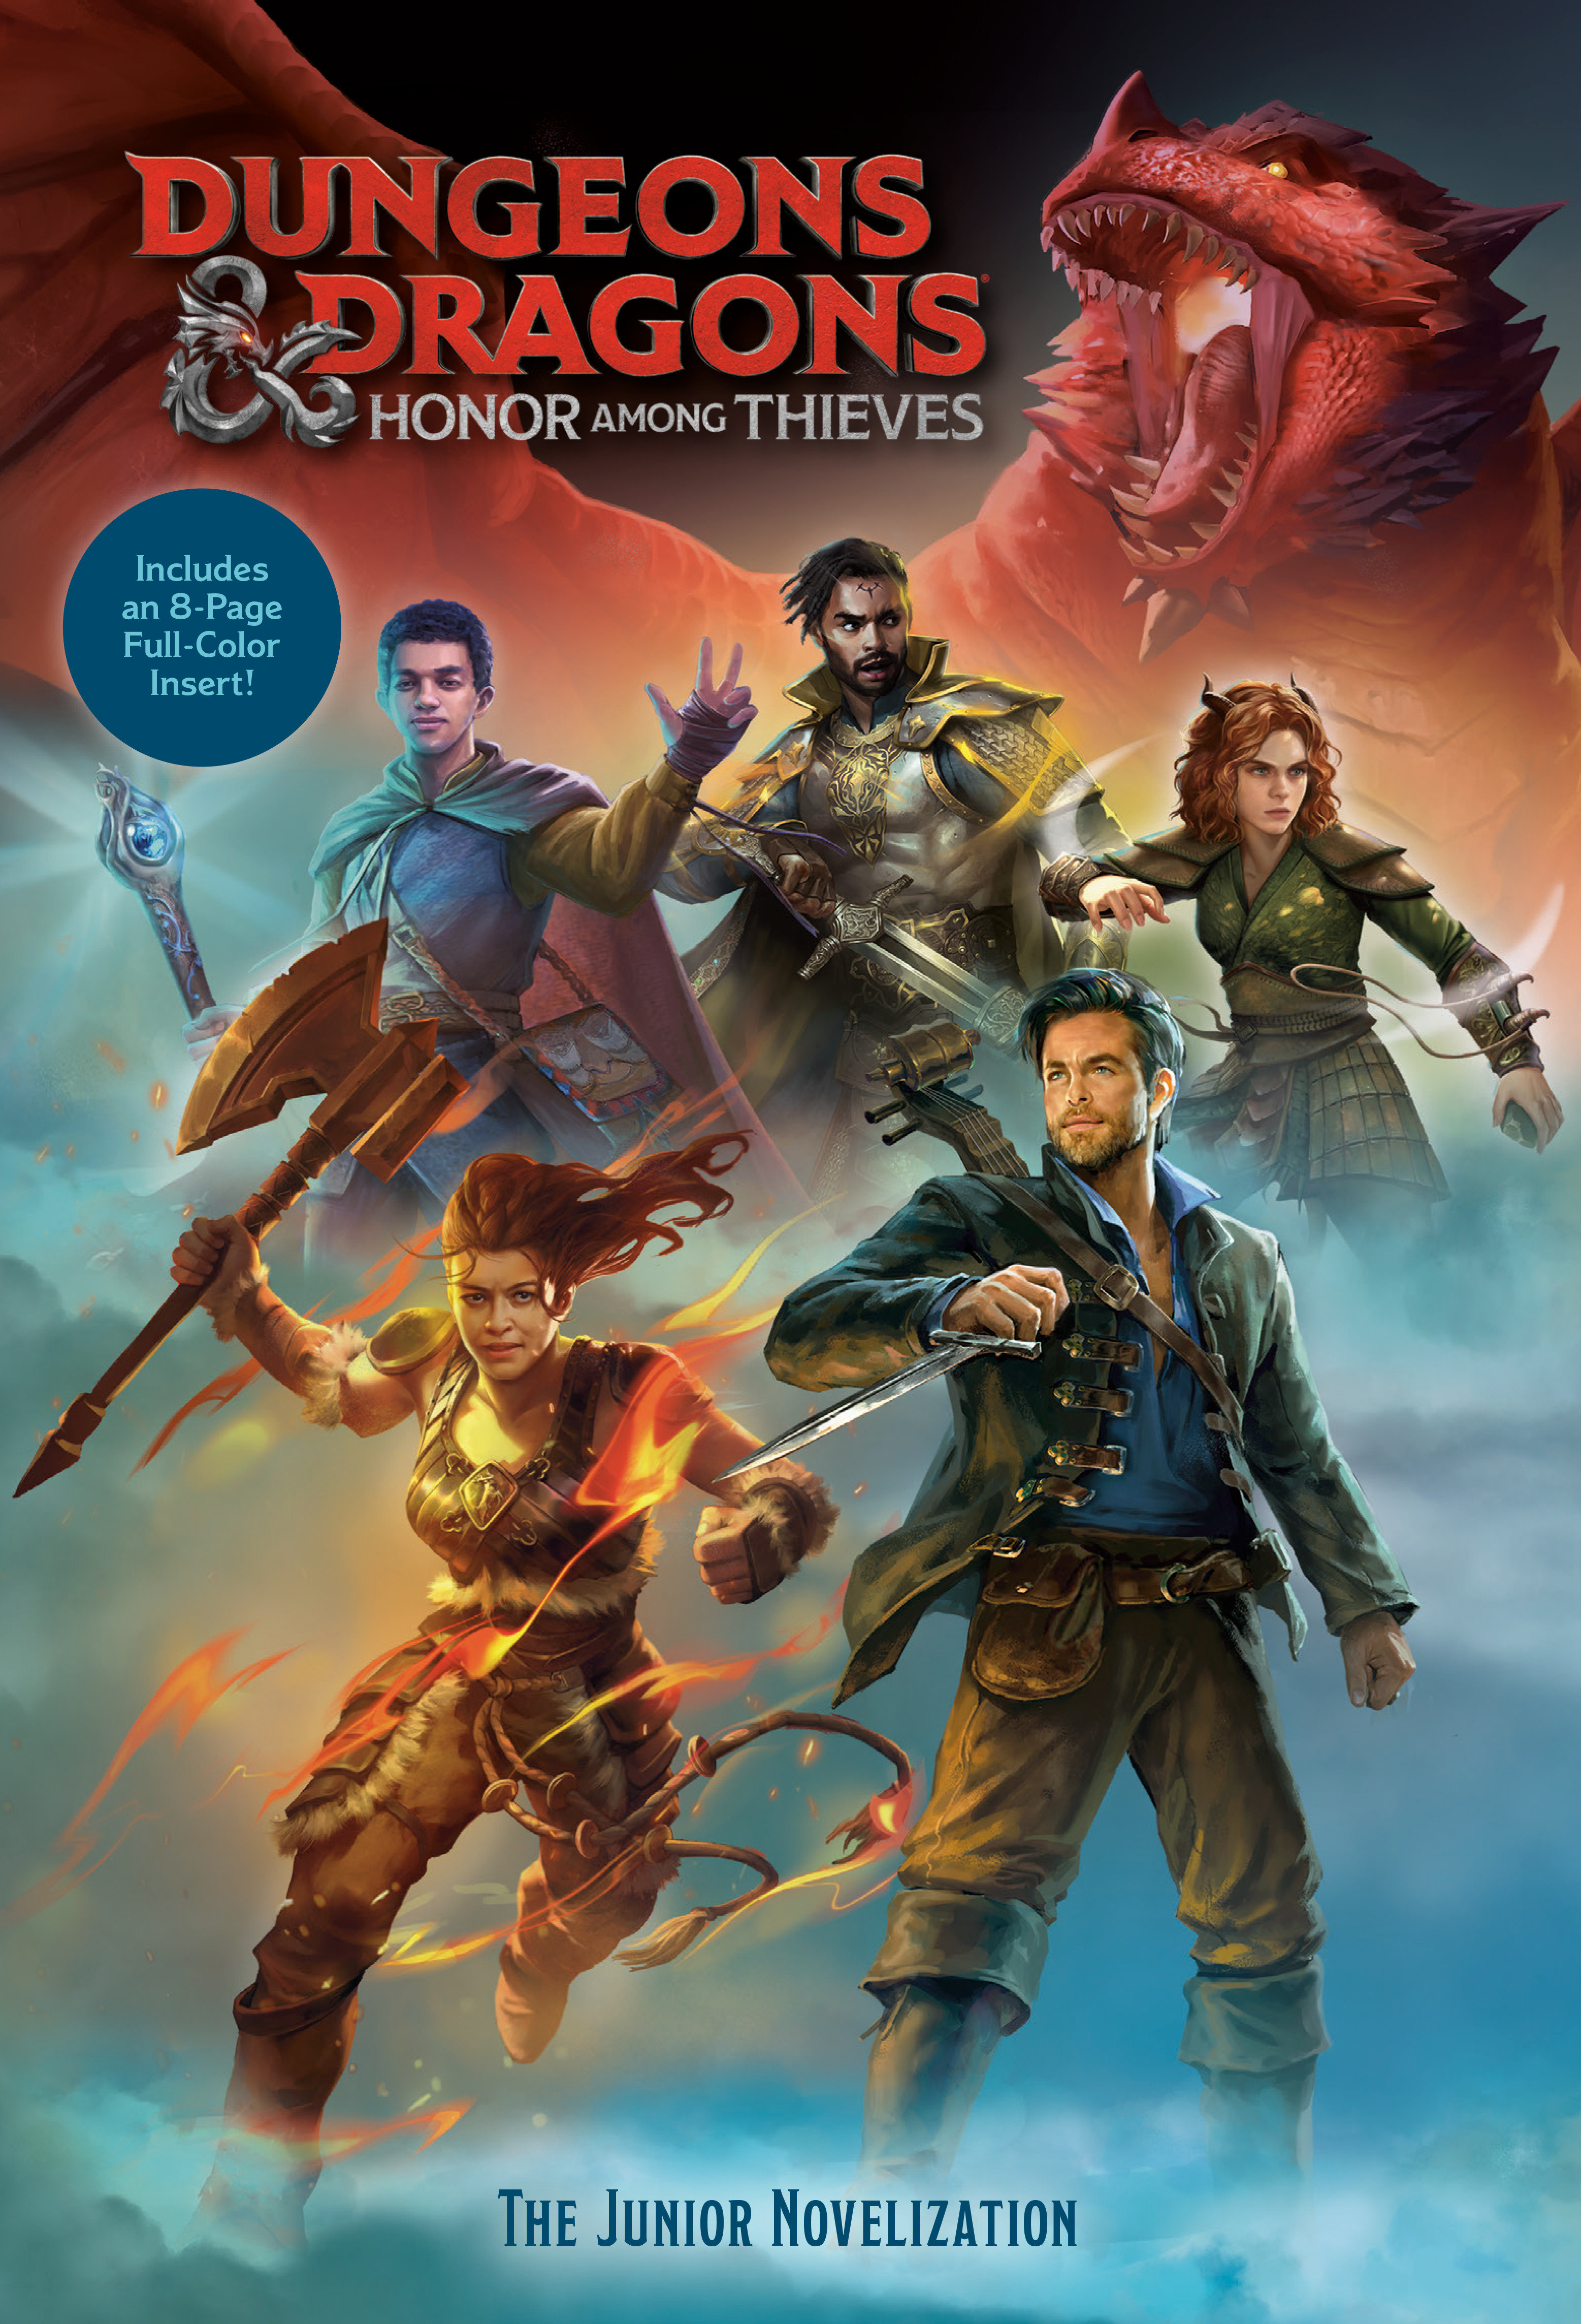 Dungeons & Dragons Honor Among Thieves: The Junior Novelization (Dungeons & Dragons Honor Among Thieves)